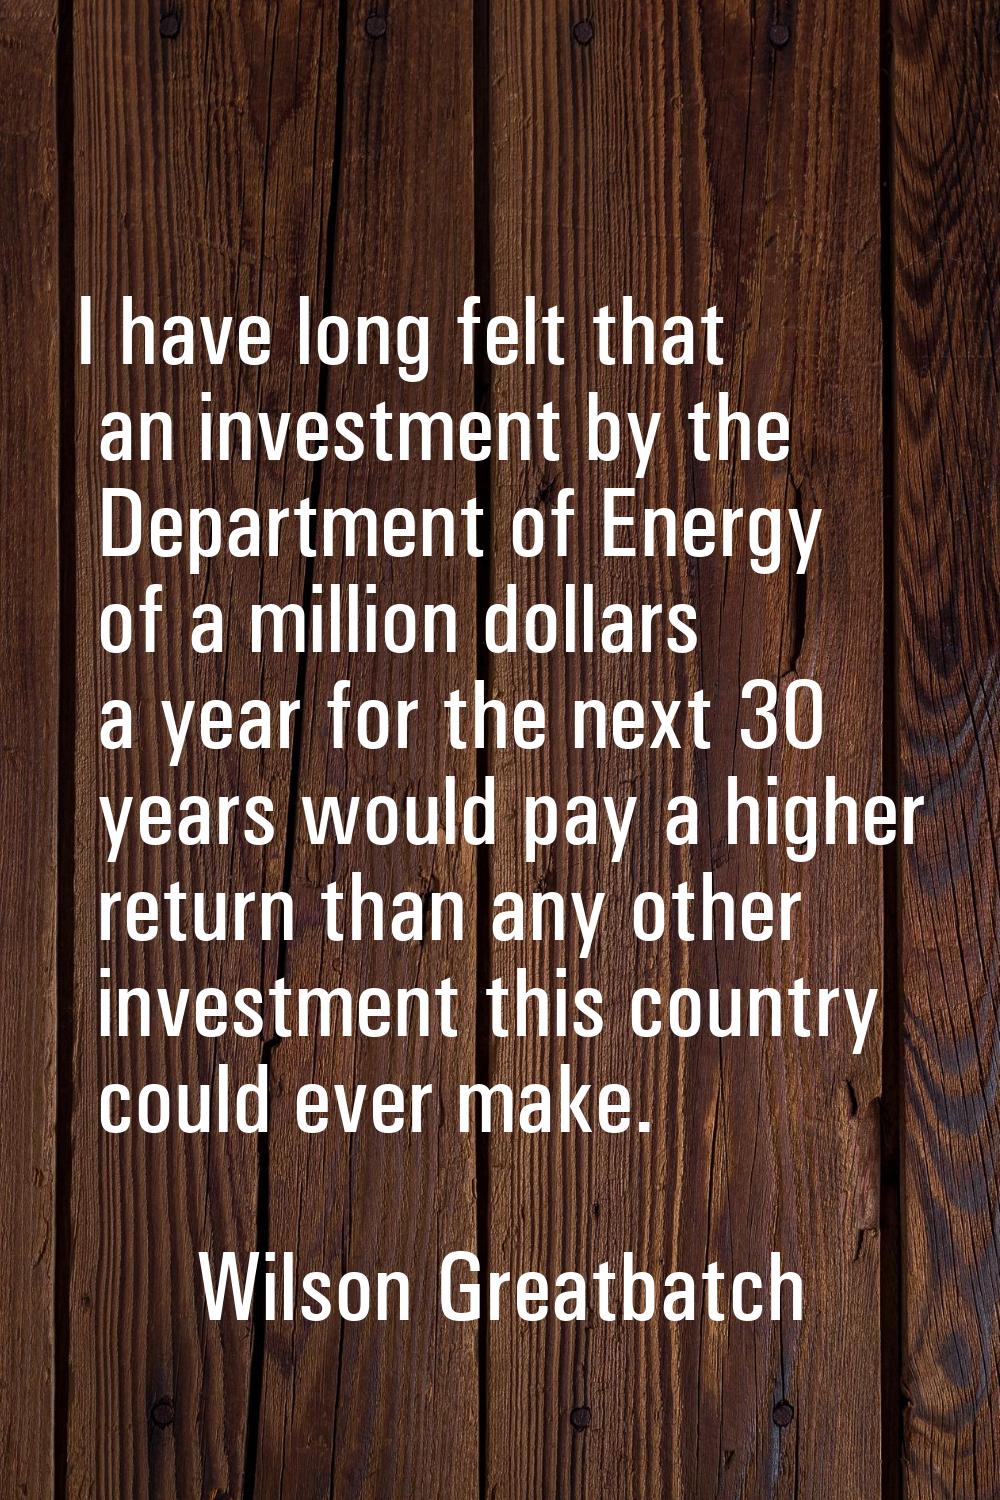 I have long felt that an investment by the Department of Energy of a million dollars a year for the